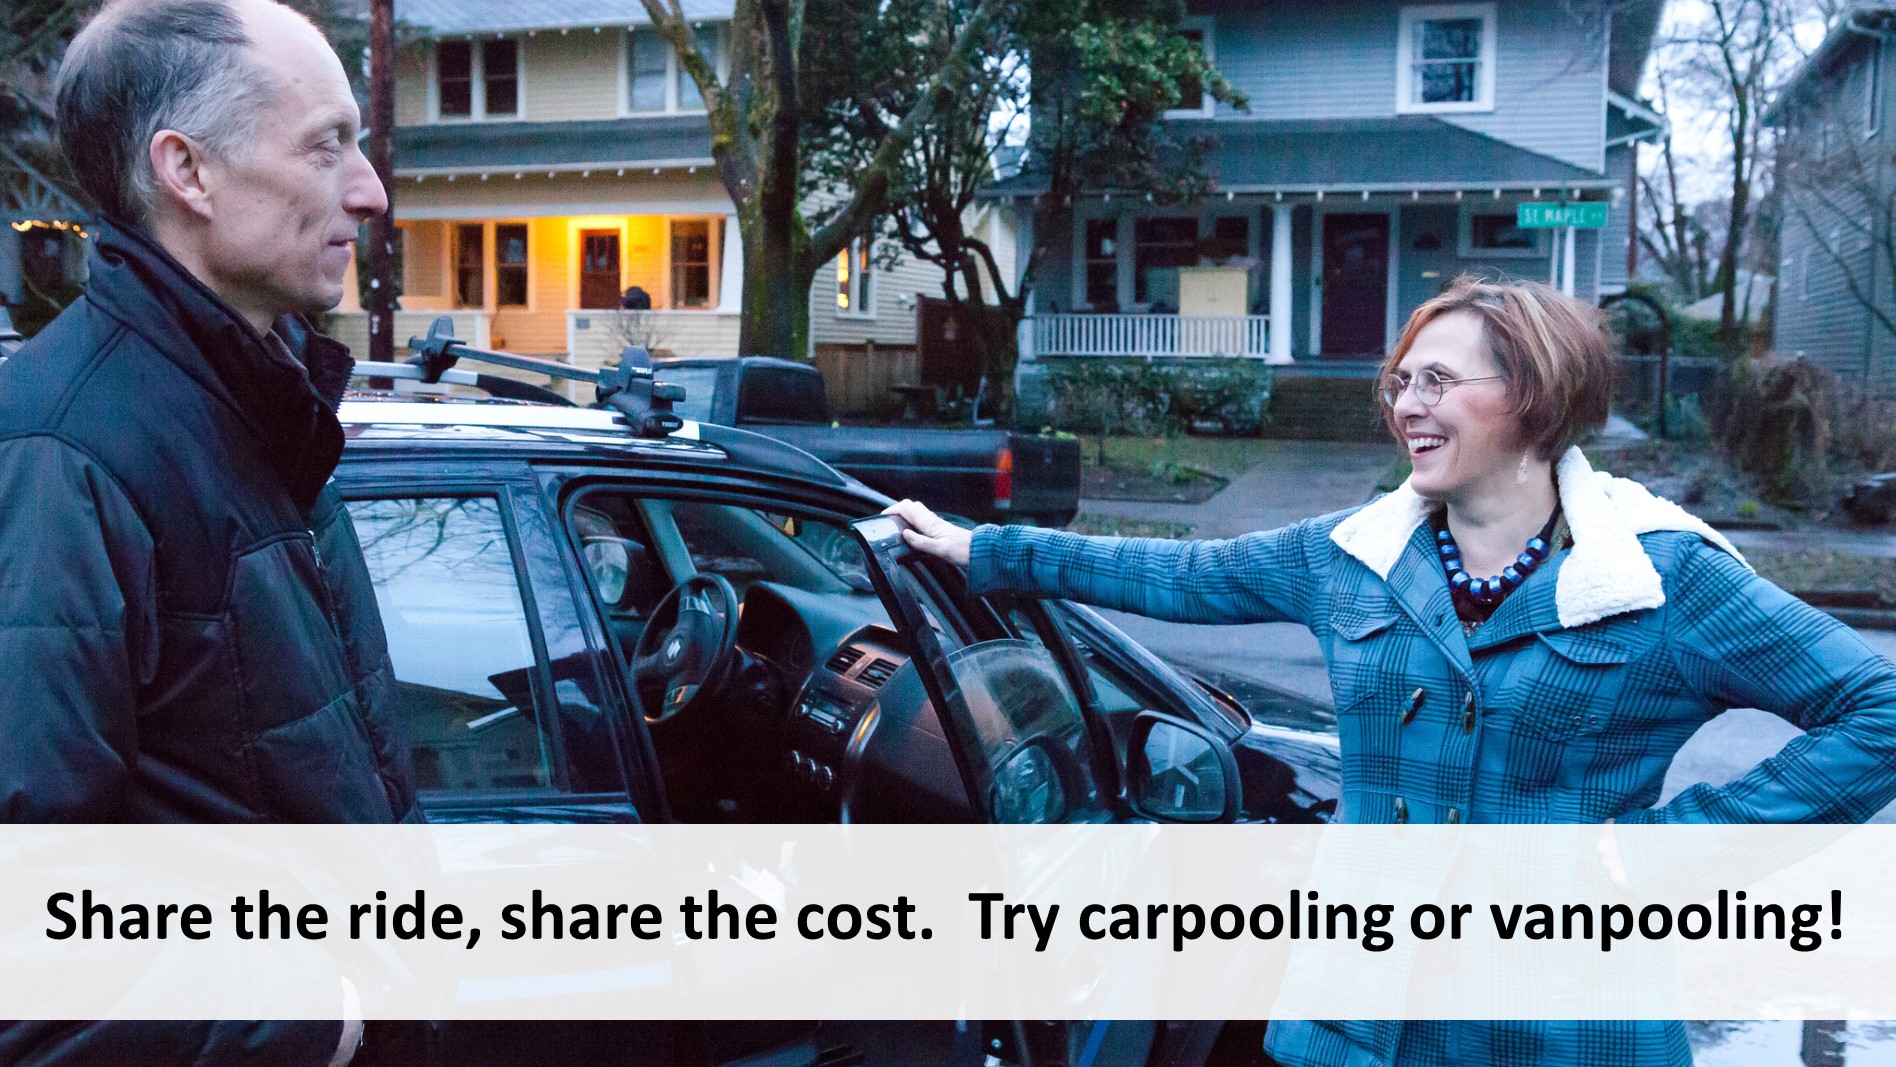 Try carpooling or vanpooling